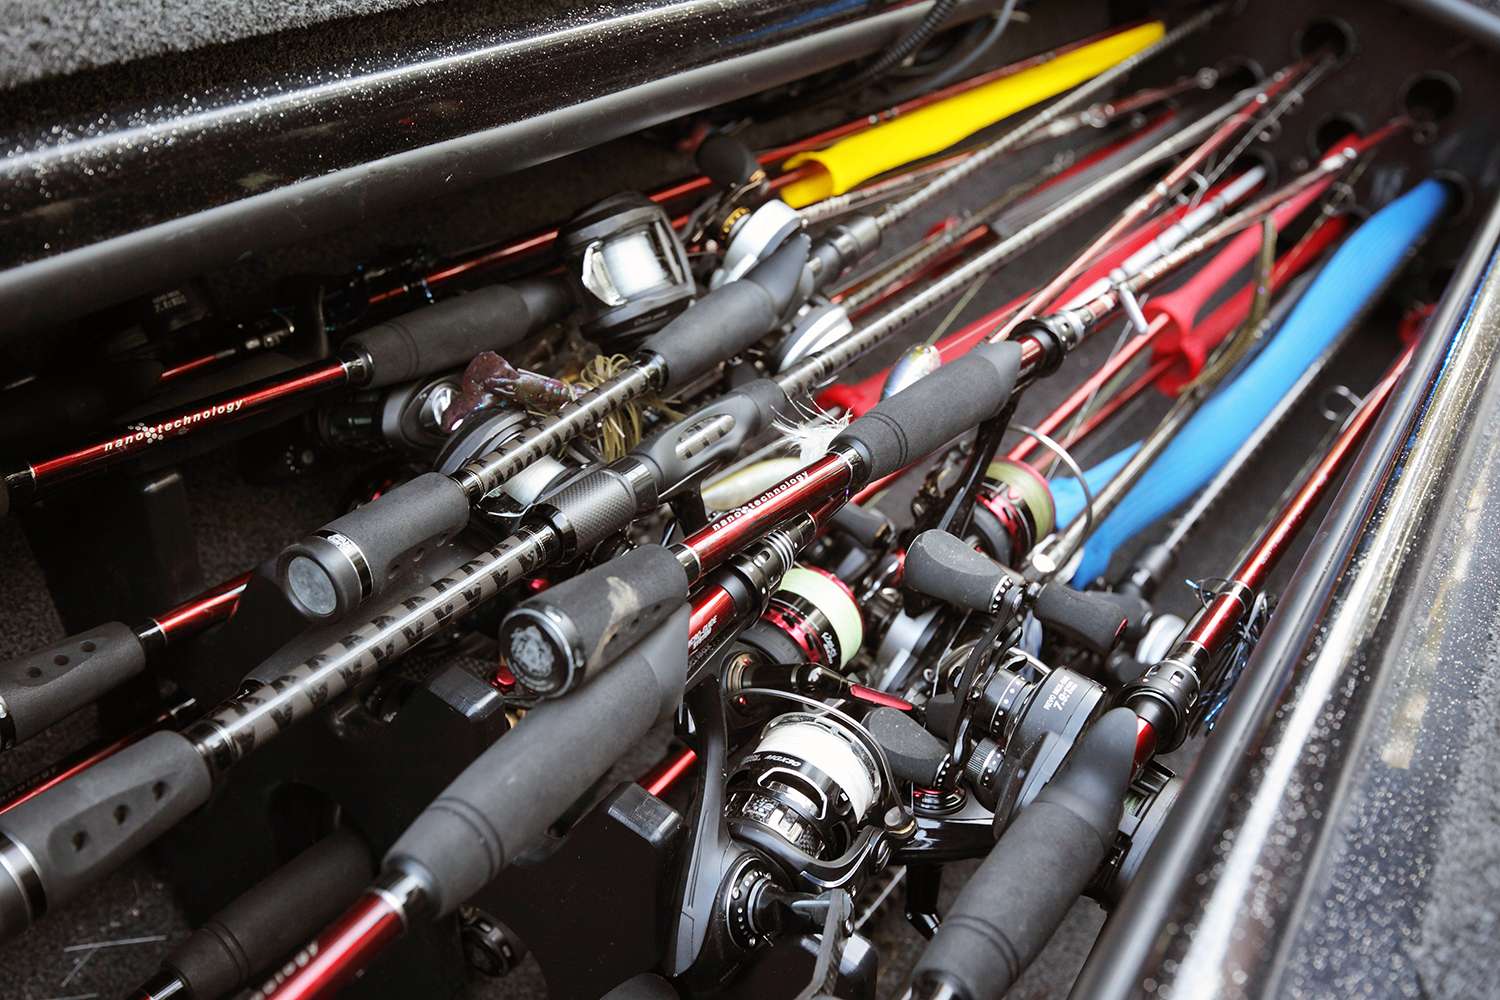 During most tournaments, the Nitro's left rod locker held 20 to 30 rods, according to Bertrand. 